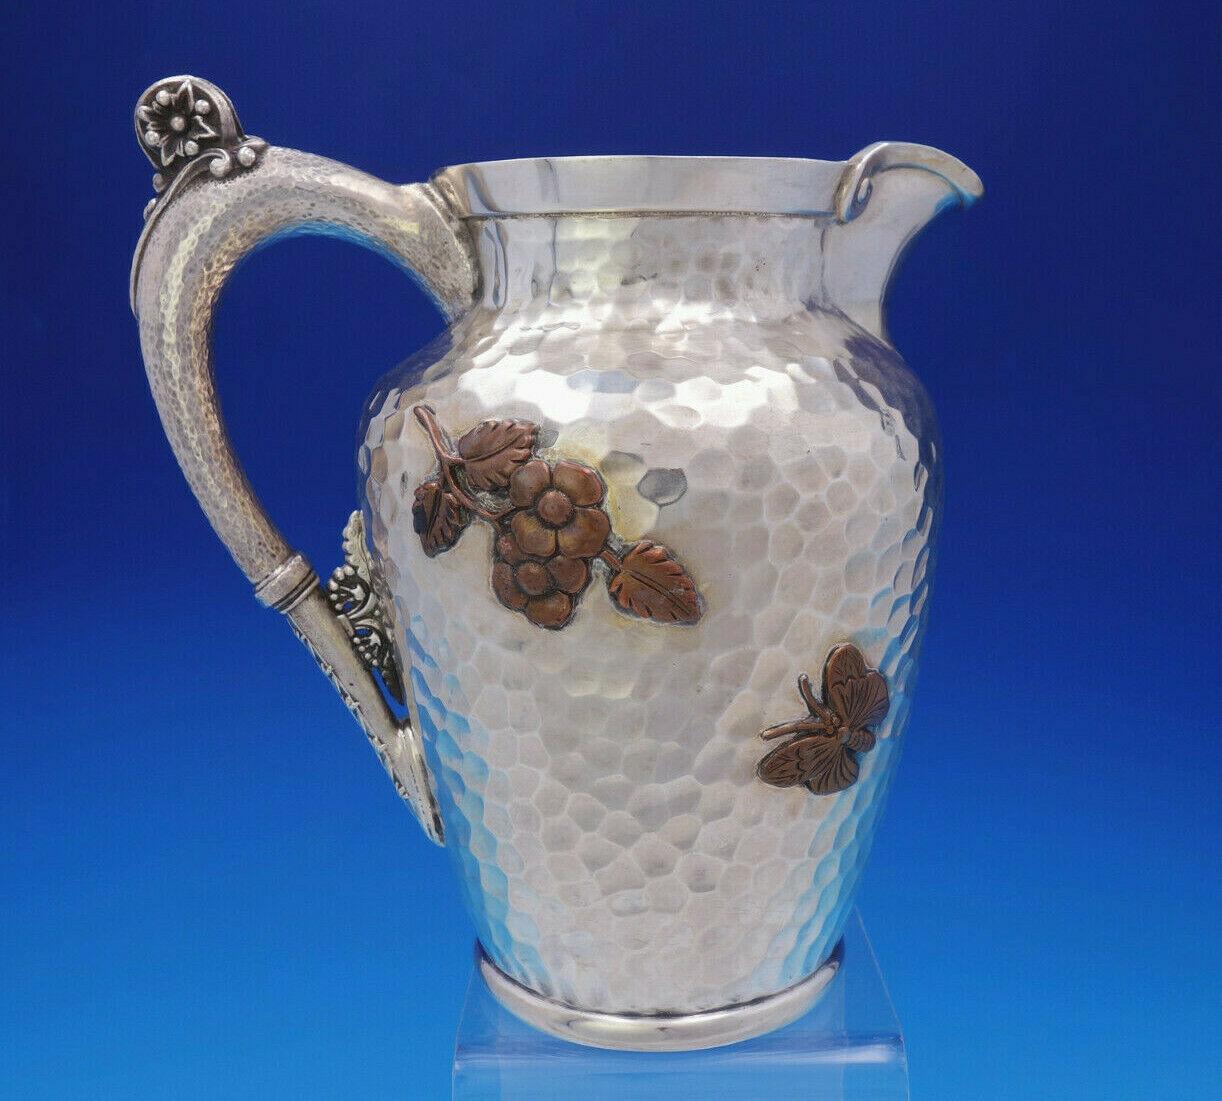 Gorham

Museum quality mixed metals Gorham sterling silver water pitcher #740. It is adorned with applied copper elements including flowers, an applied copper butterfly, applied large stork/egret/bird in flight, and applied copper cattails. There